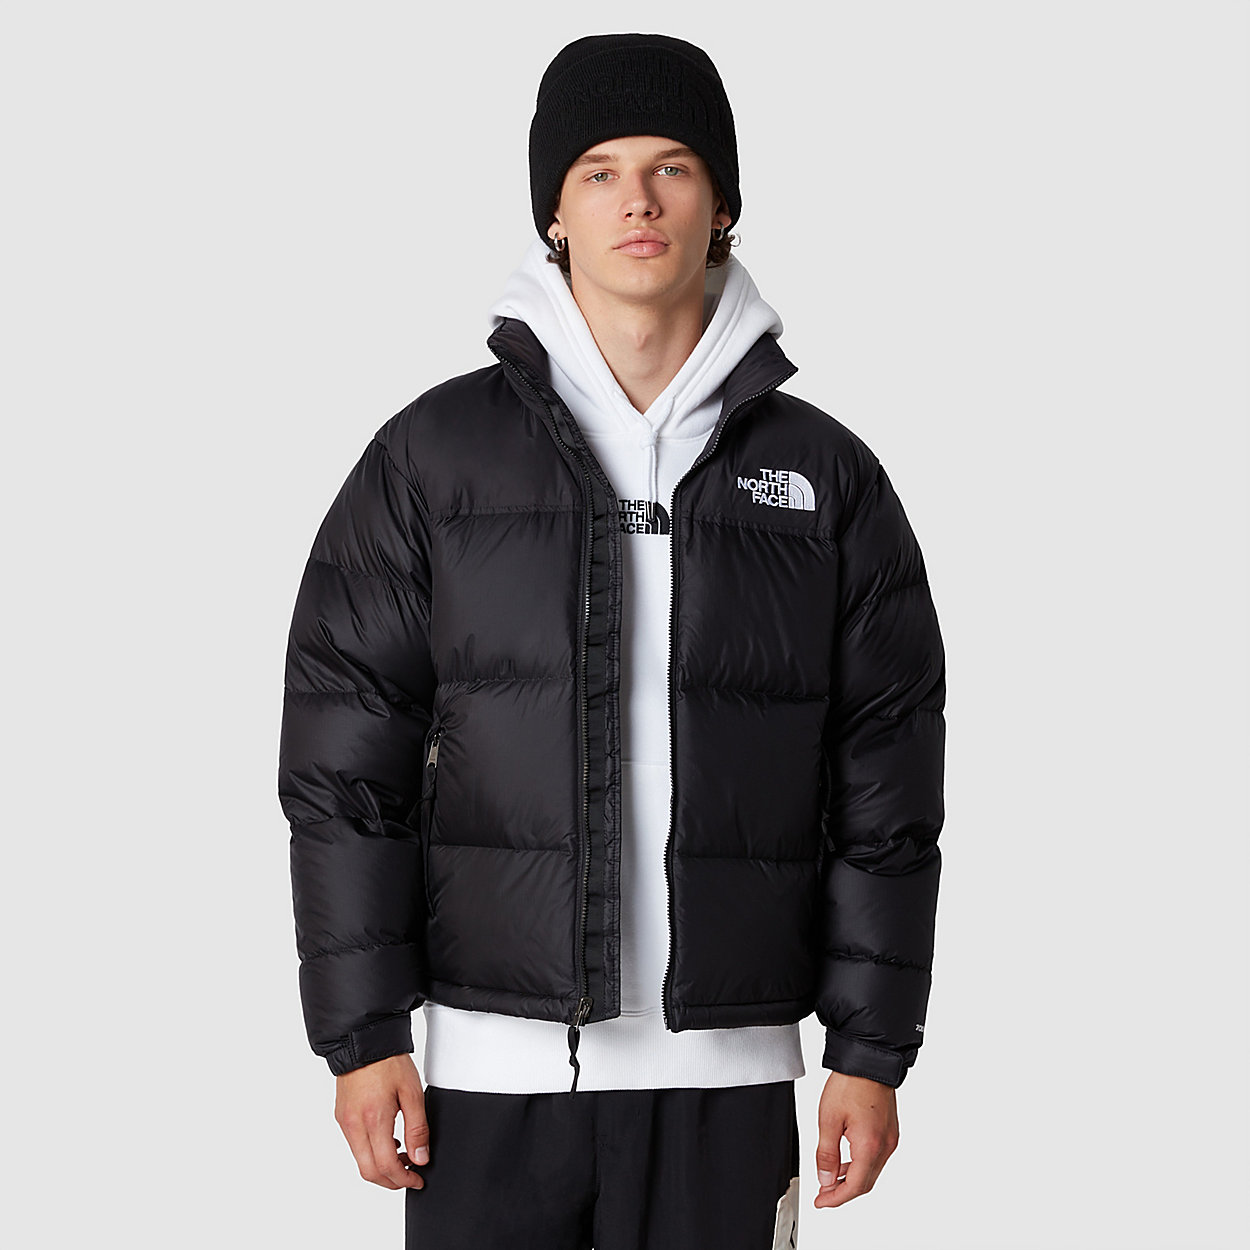 Unlock Wilderness' choice in the Trespass Vs North Face comparison, the 1996 Retro Nuptse Jacket by The North Face